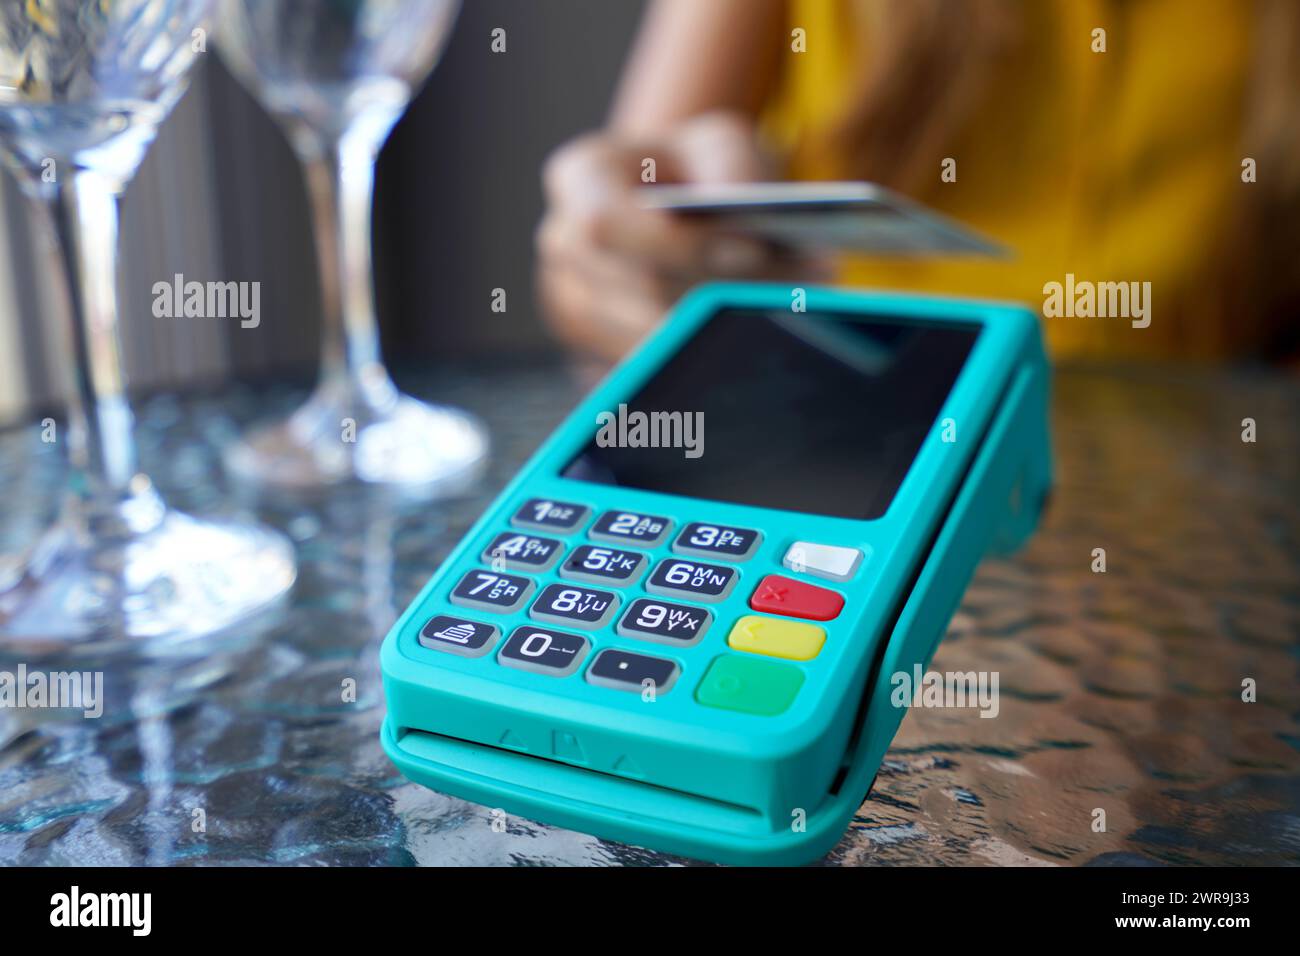 Extreme close-up of unrecognizable customer using credit card for online payment. NFC contactless payment by credit card and pos terminal at the cafe. Stock Photo